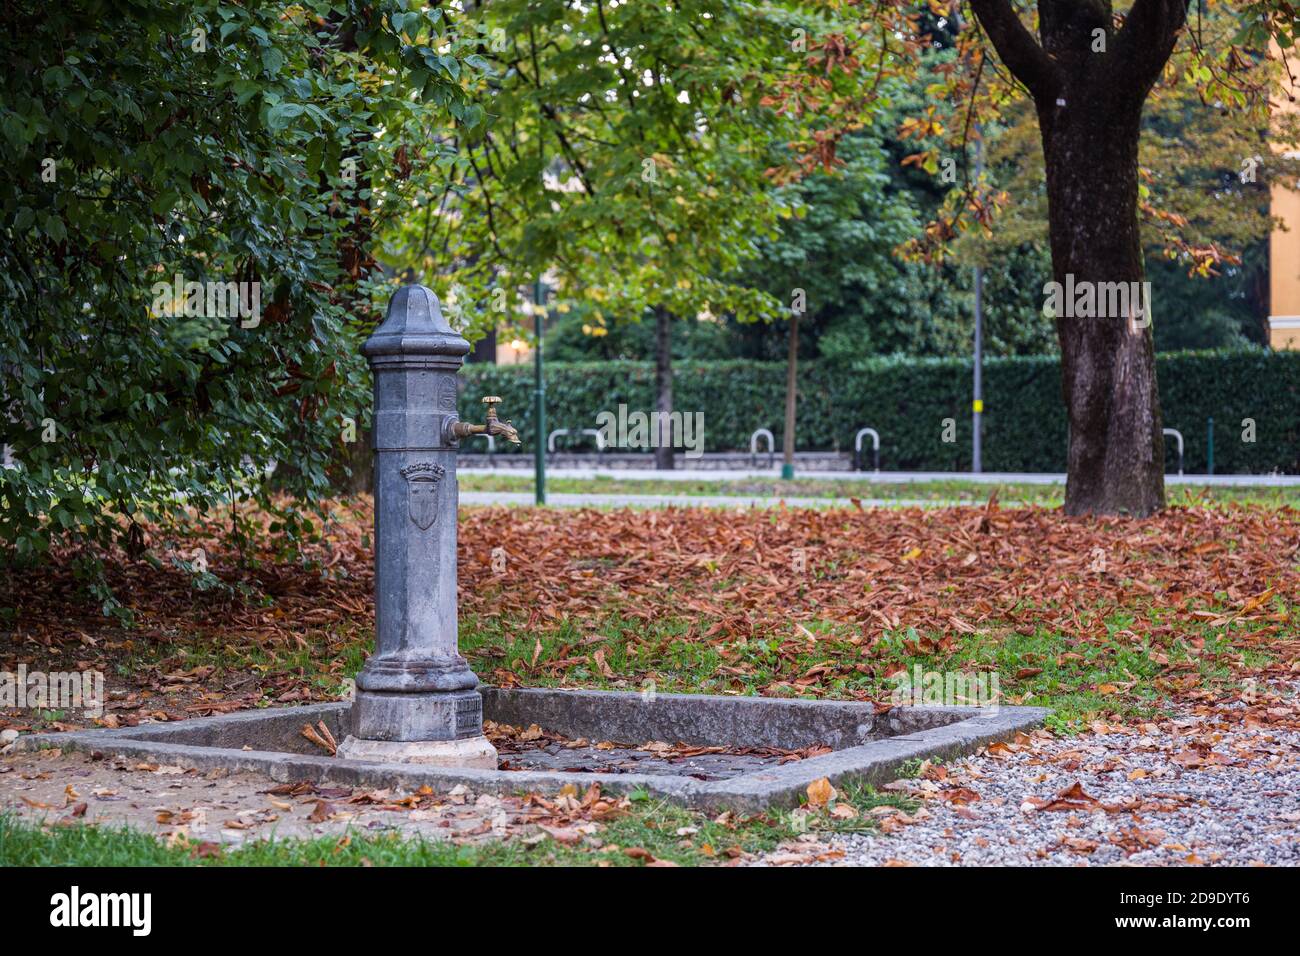 Faucet in a park source of potable water with fallen brown leaves in the background. Autumn mood Stock Photo